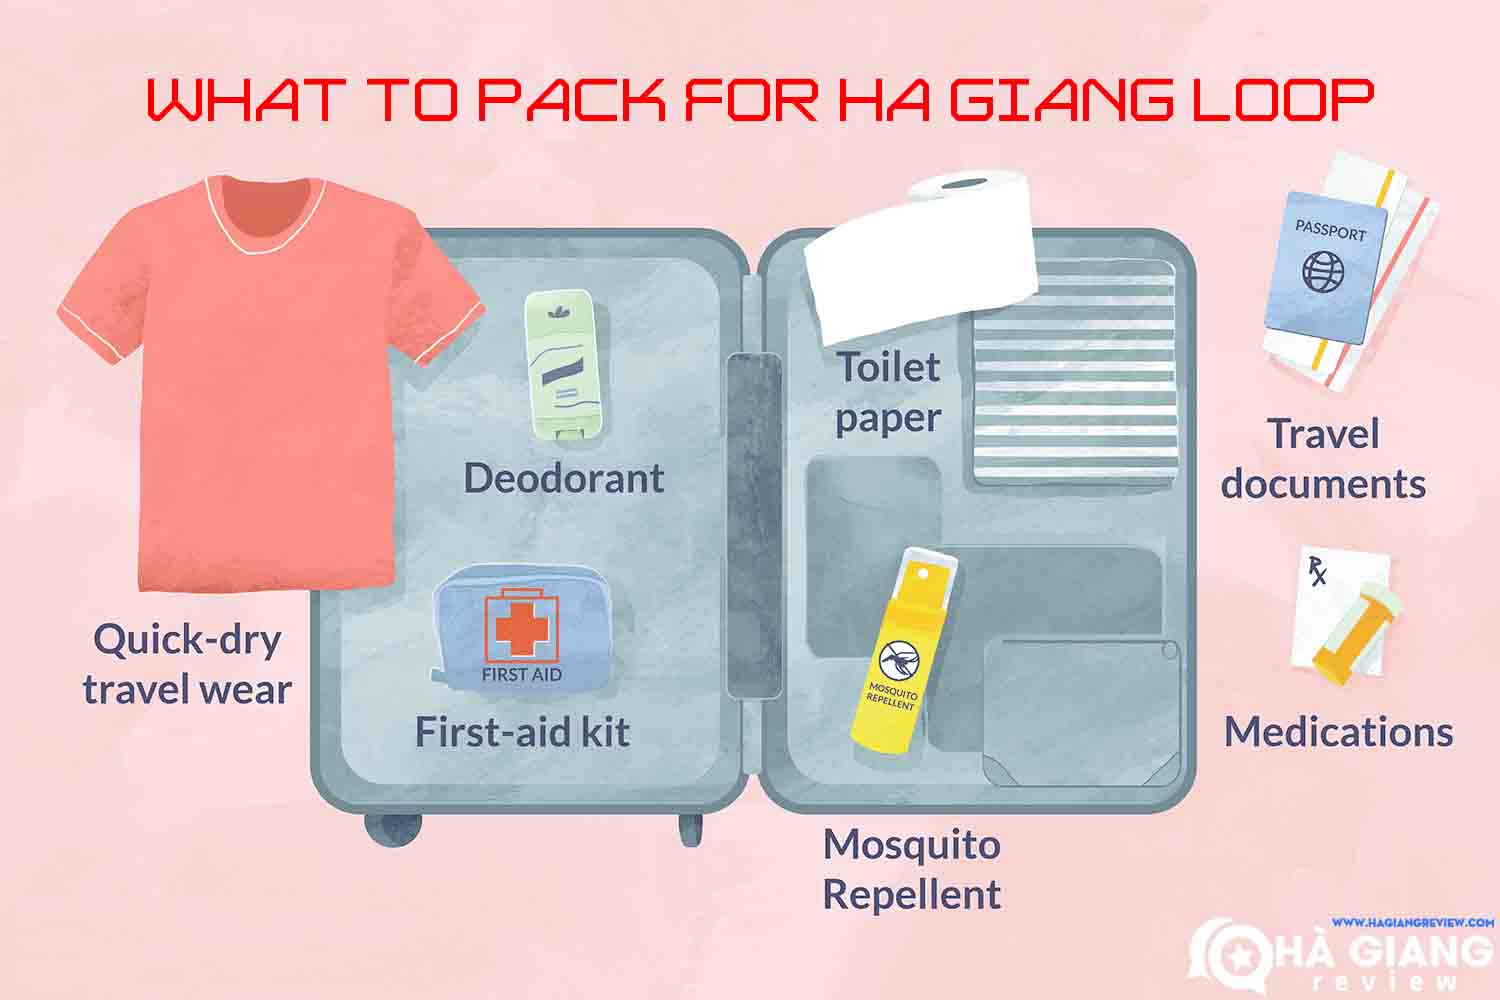 What Should Pack for Ha Giang Loop Tour?